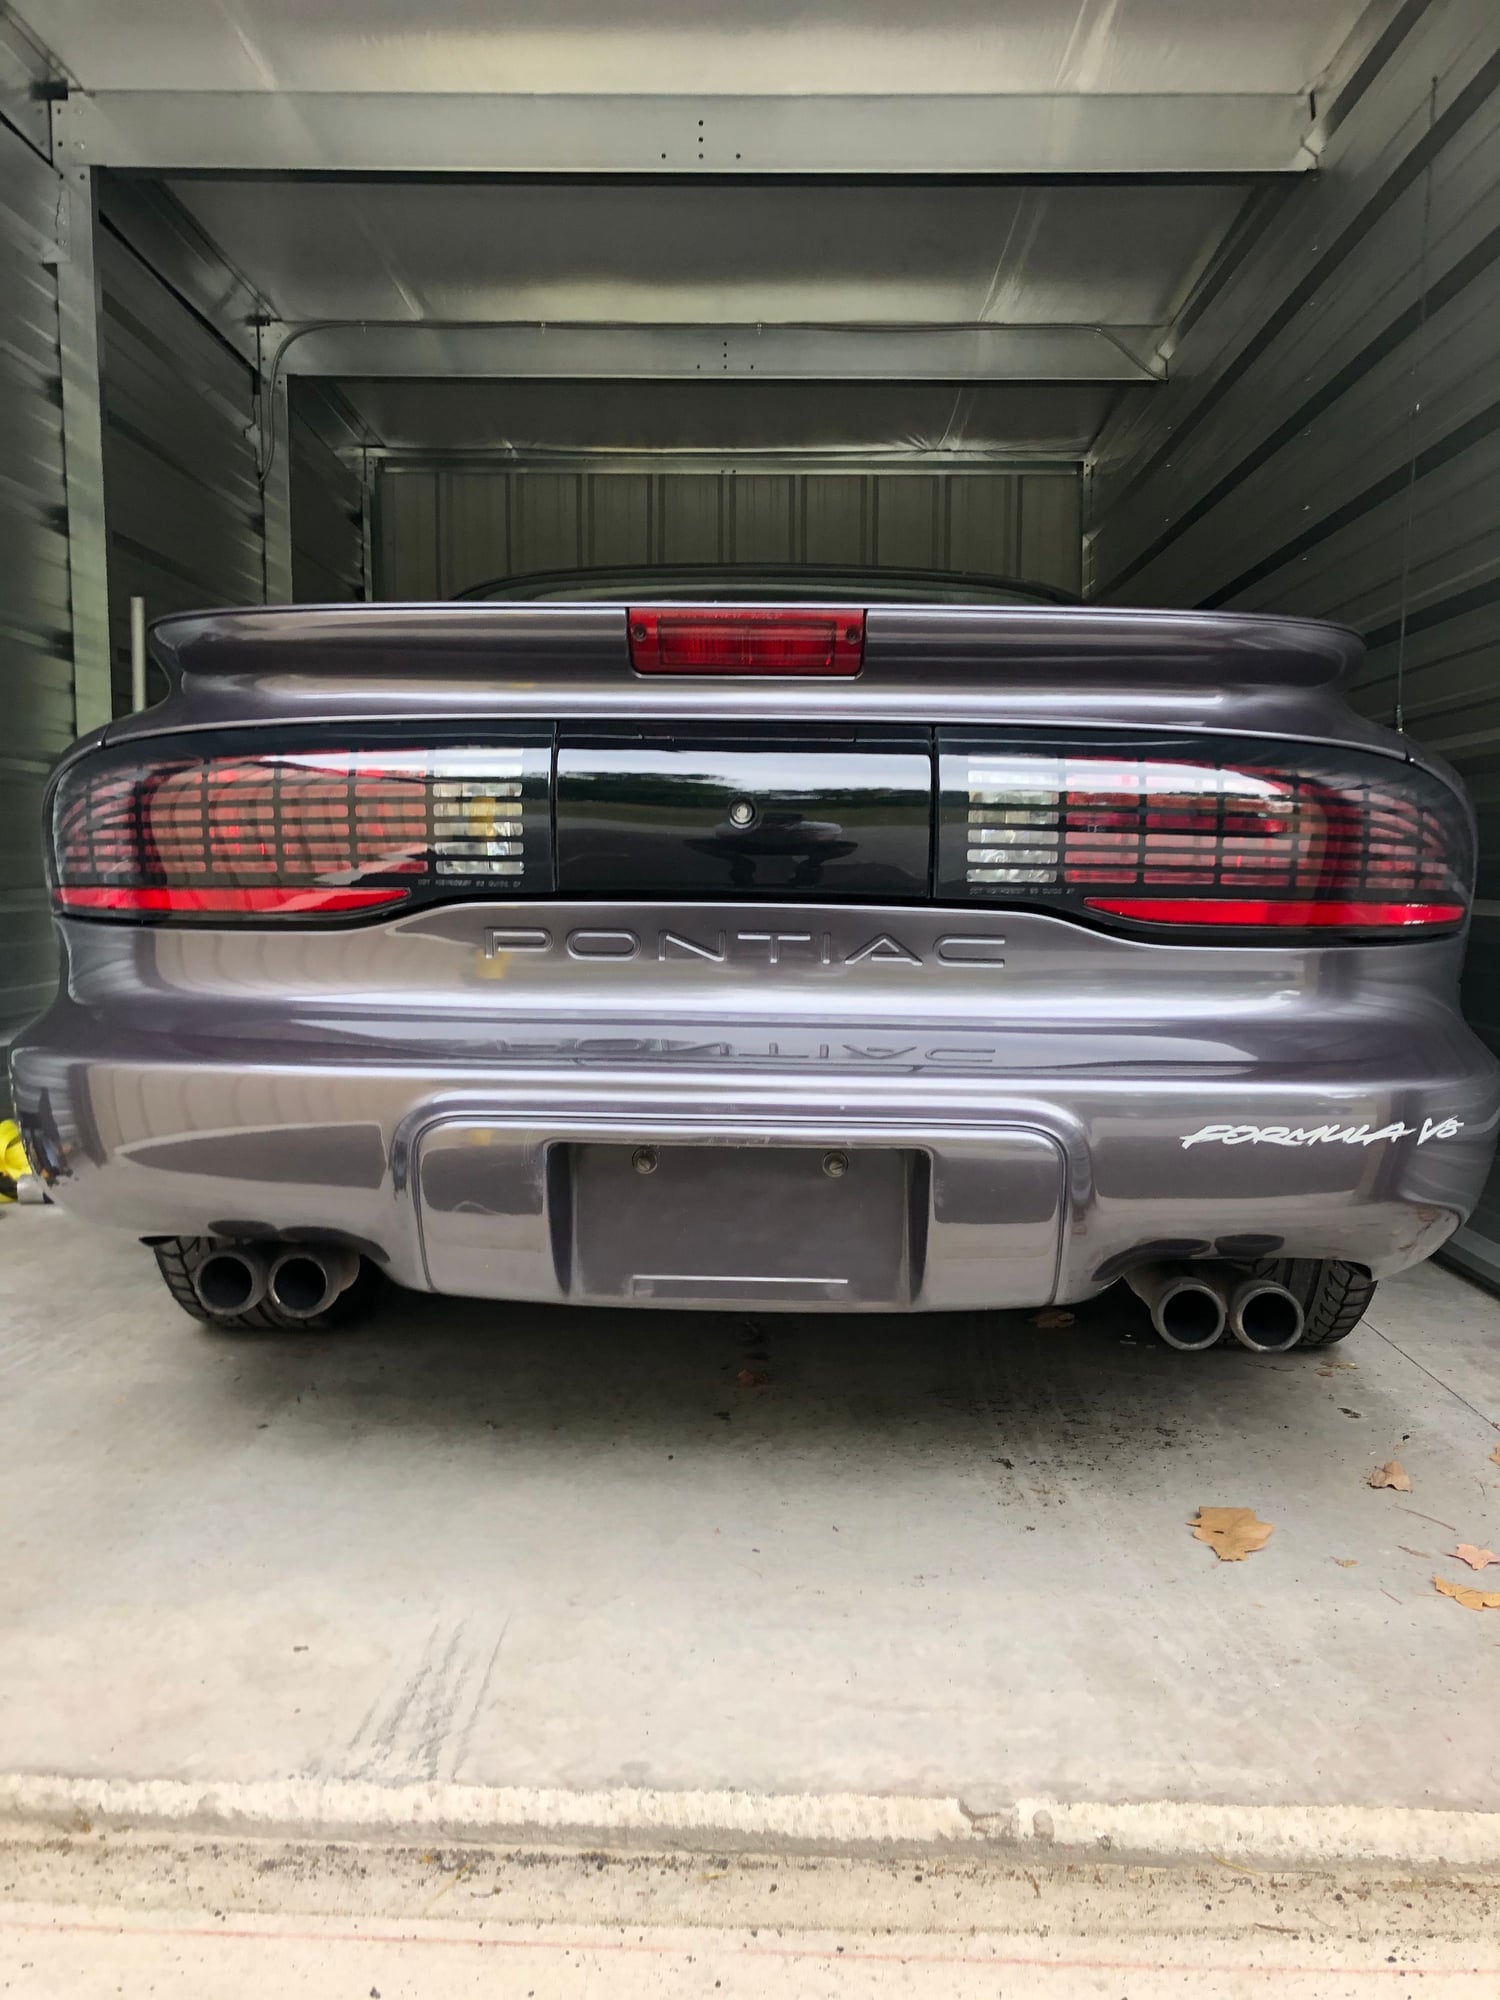 1994 Pontiac Firebird - 1994 Firebird Formula, 1-owner, all original - Used - VIN 2G2FV22PR42248642 - 97,000 Miles - 8 cyl - 2WD - Automatic - Coupe - Gray - Rochester, NY 14586, United States